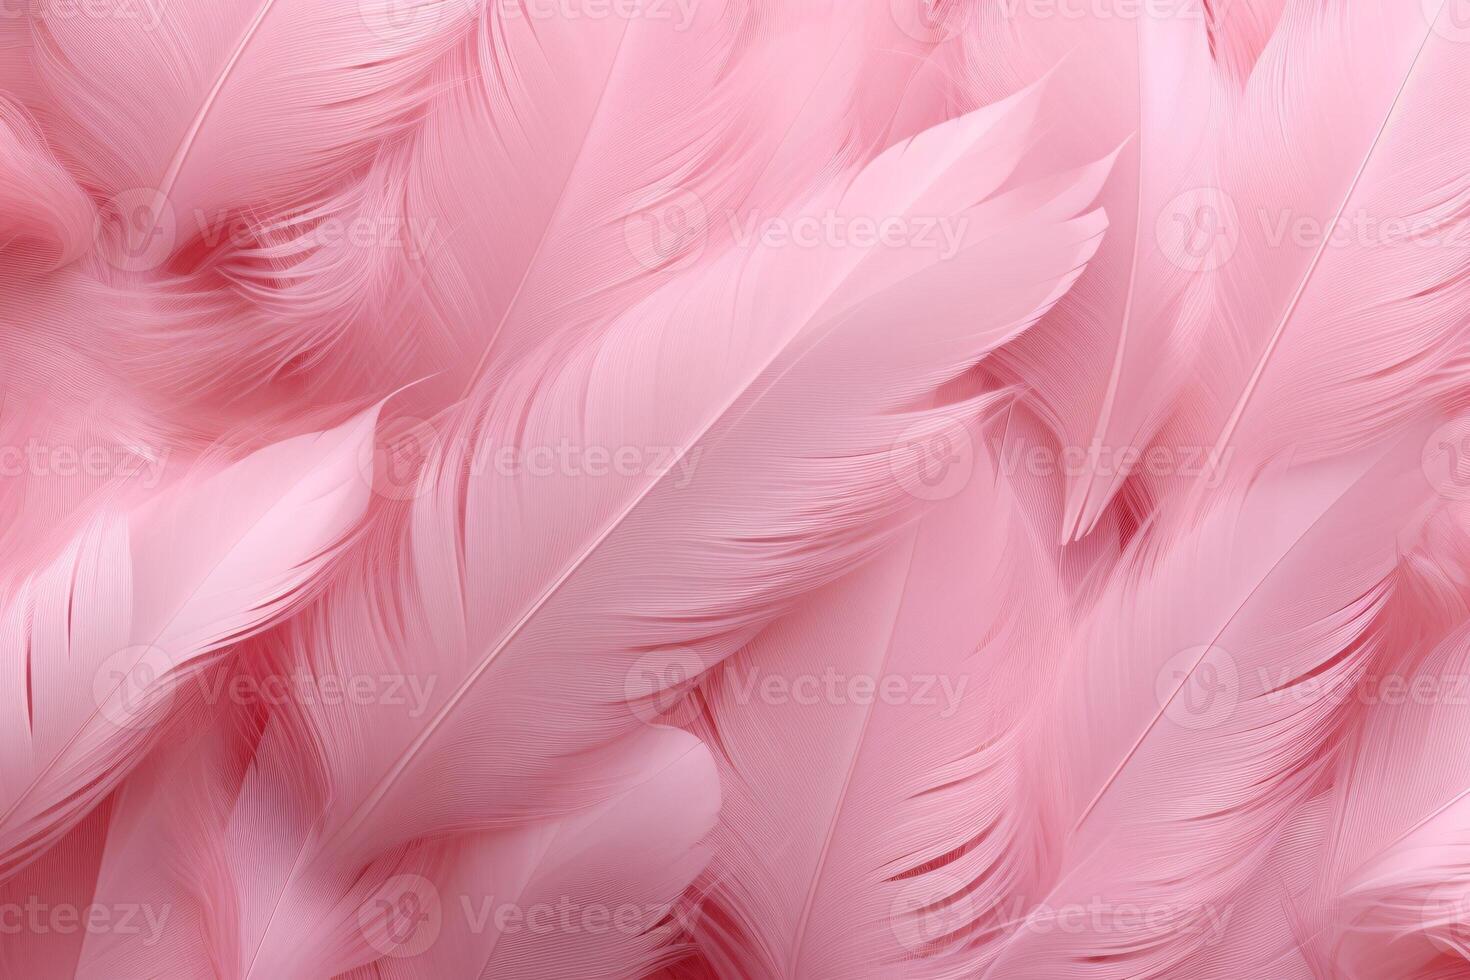 Beautiful feather pattern wallpaper, dreamy feather abstract background, pink feathers wallpaper, light pink bird feathers pattern, photo